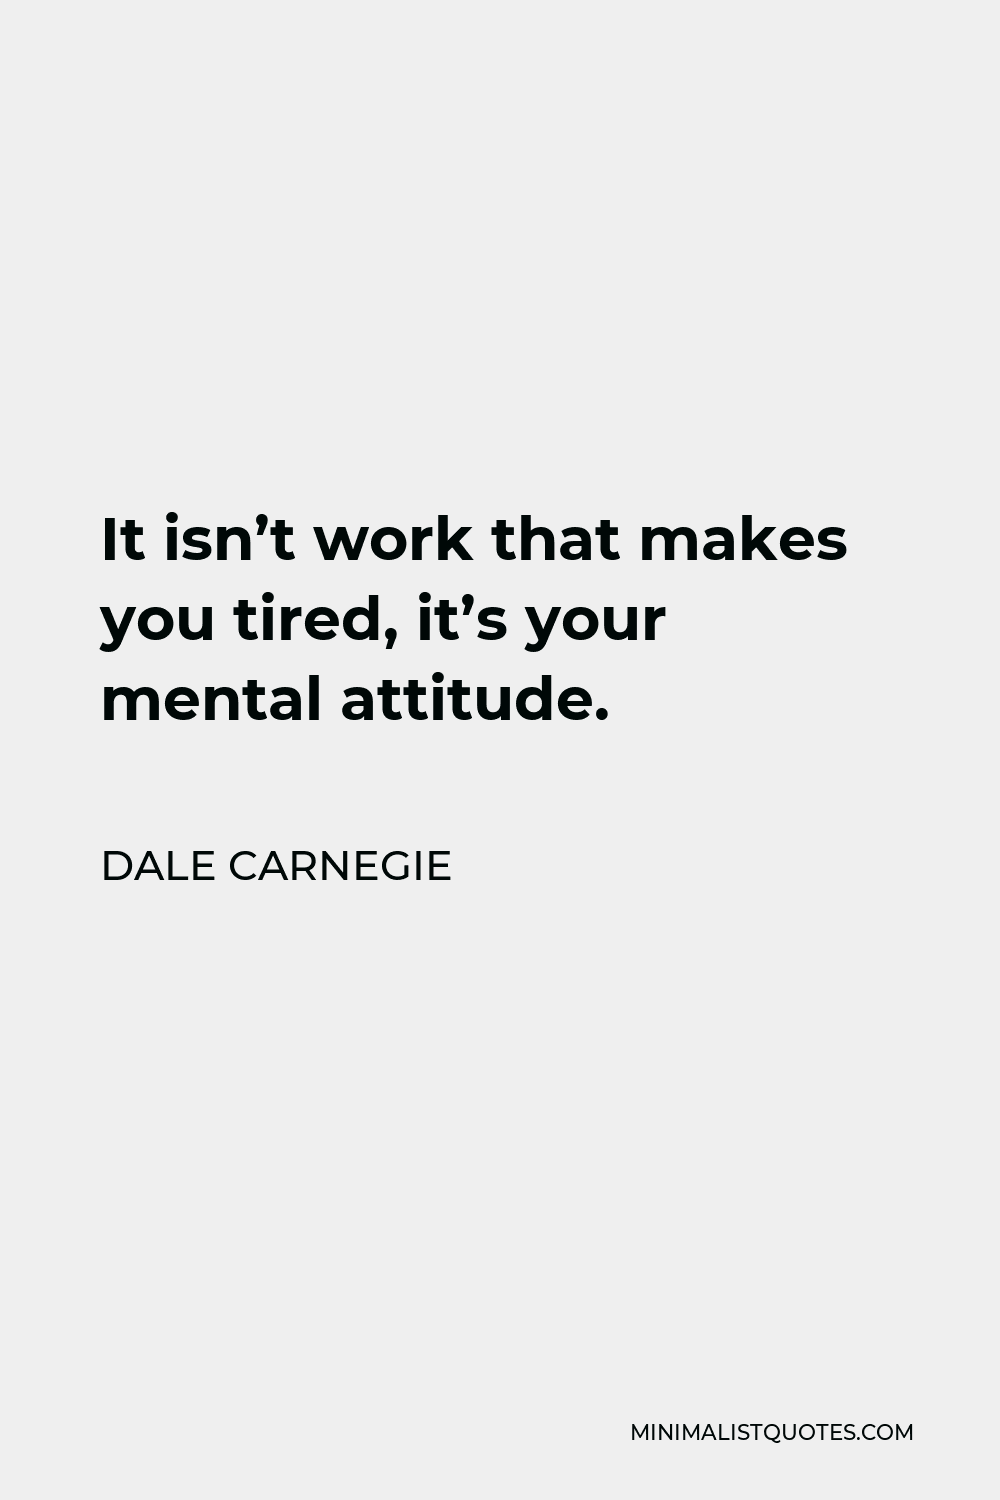 Dale Carnegie Quote - It isn’t work that makes you tired, it’s your mental attitude.